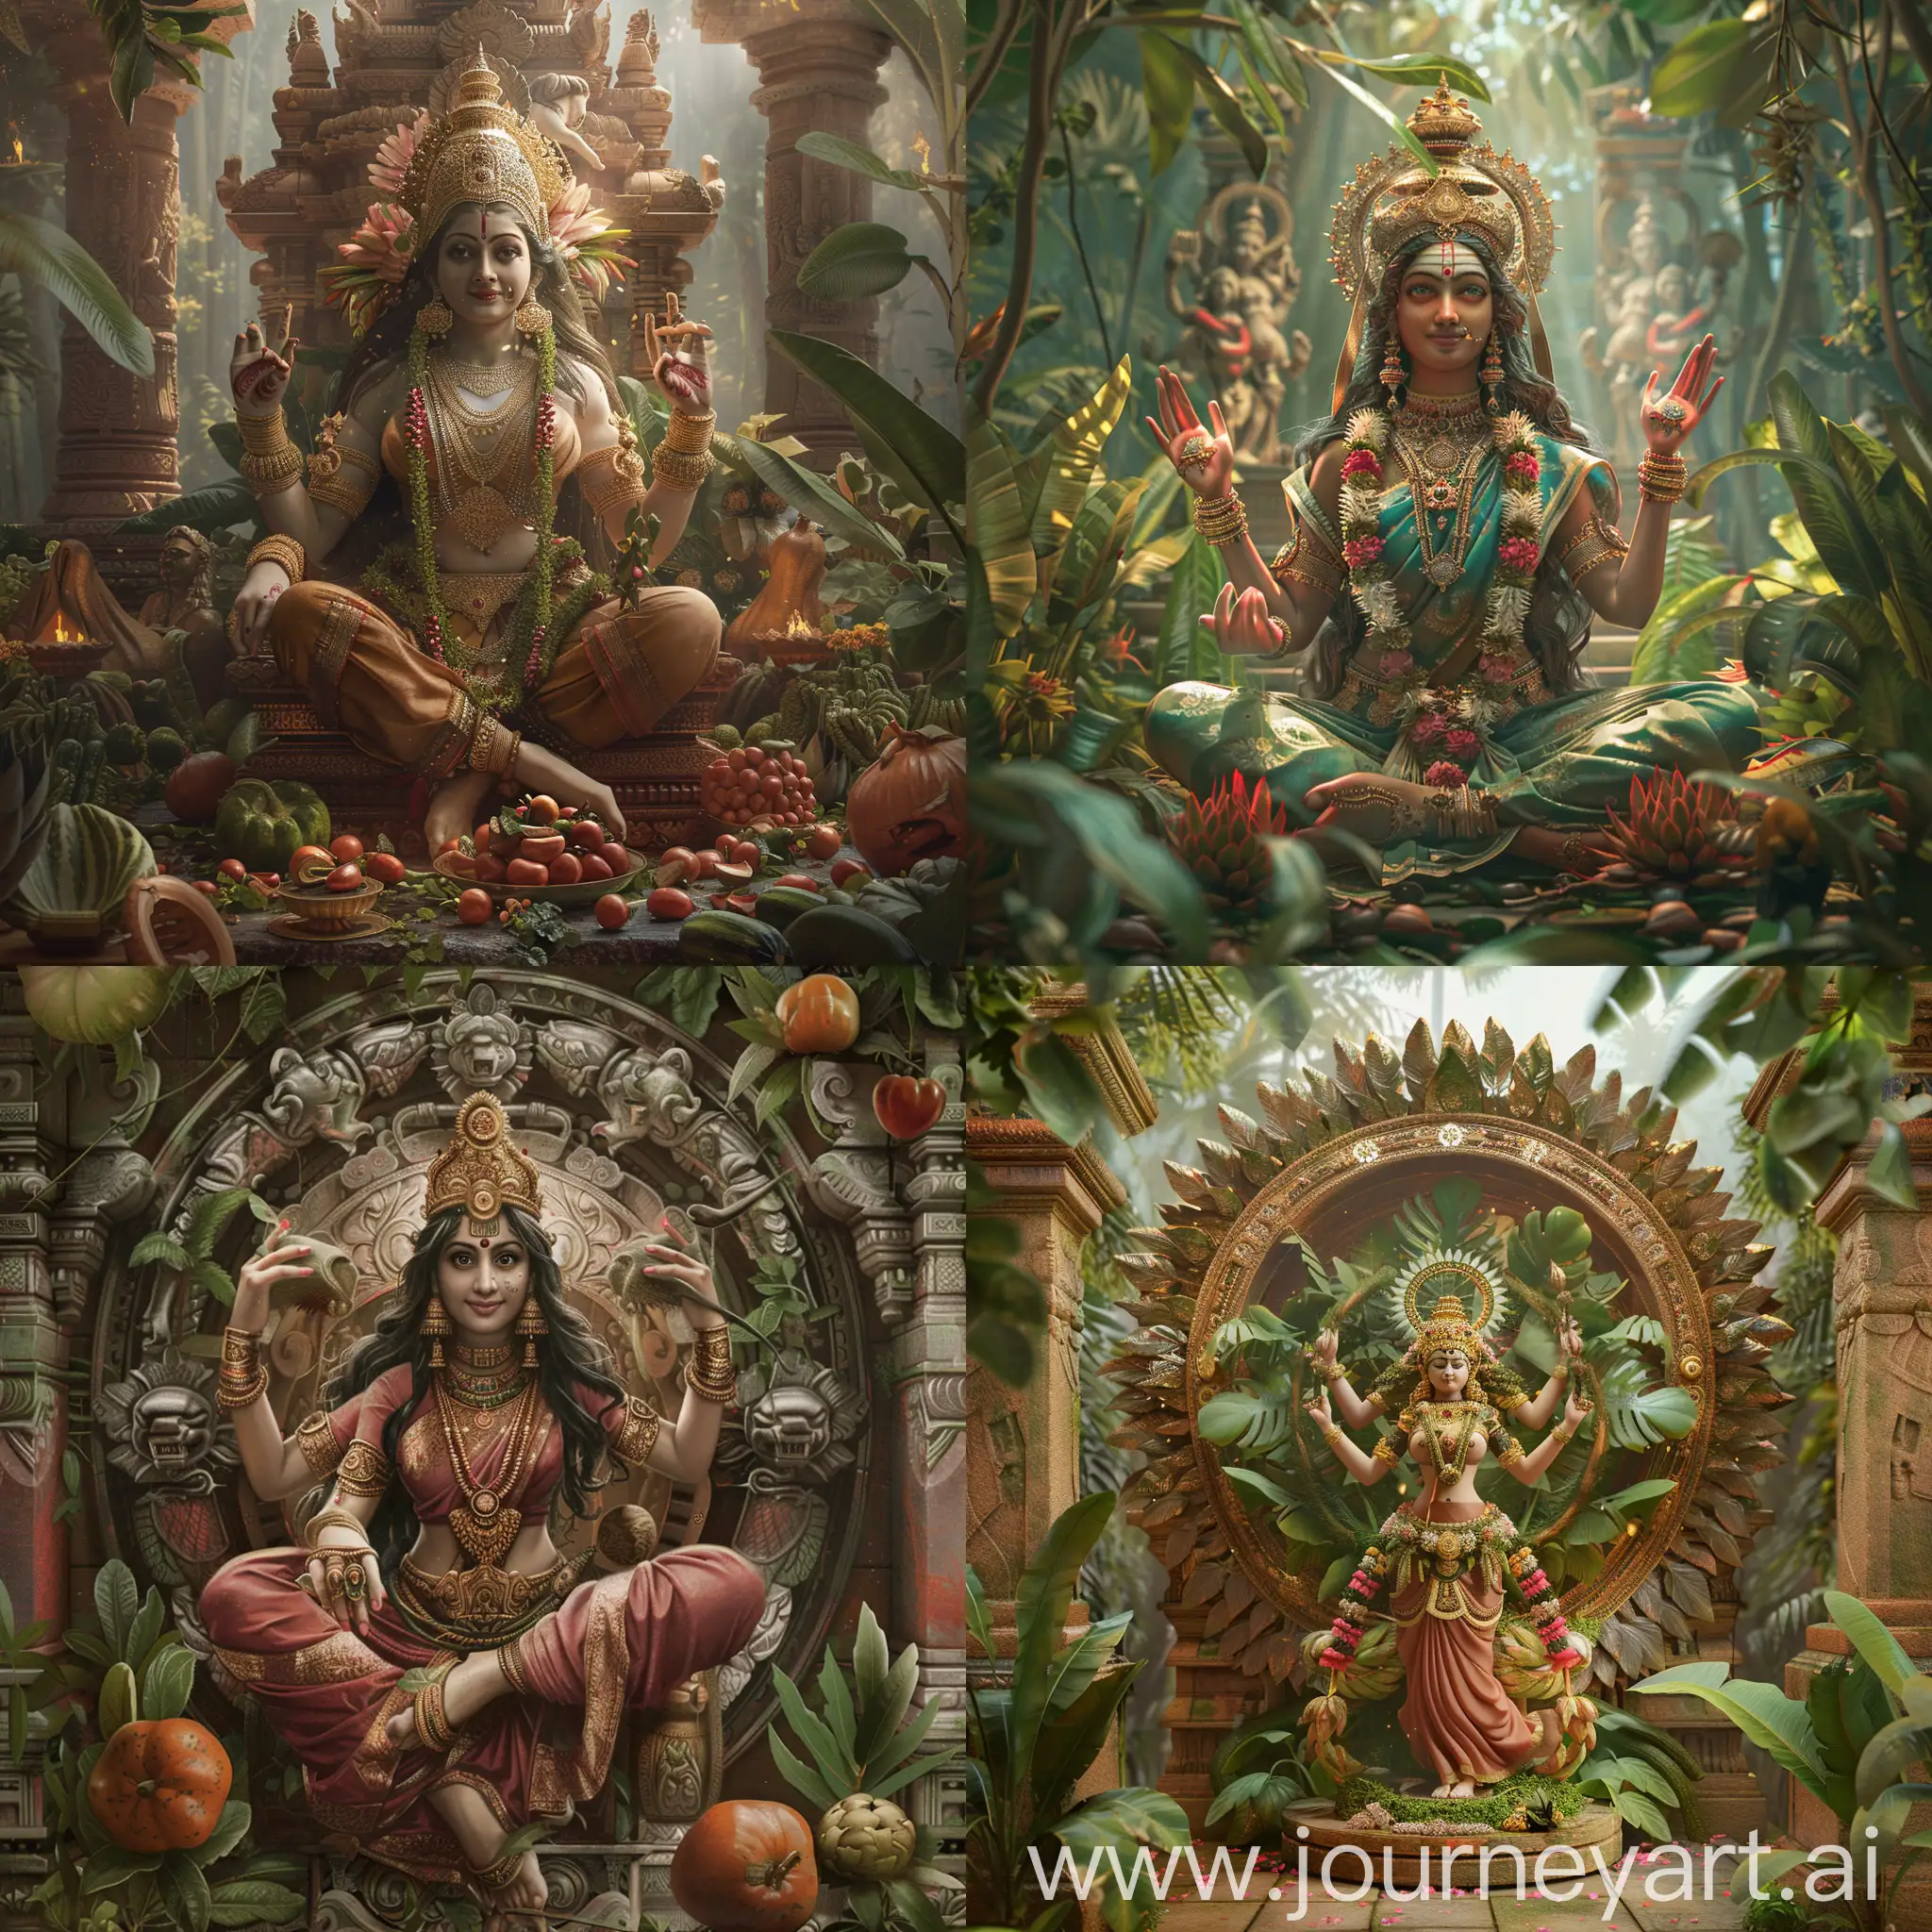 a stunning visual of a theme "a very beautiful Yakshi in a Kerala temple ", bosomy, picturesque, intricately detailed, photorrealistic selfie scene, A very well crafted, detailed, subtle smooth color tone, vegetable world background